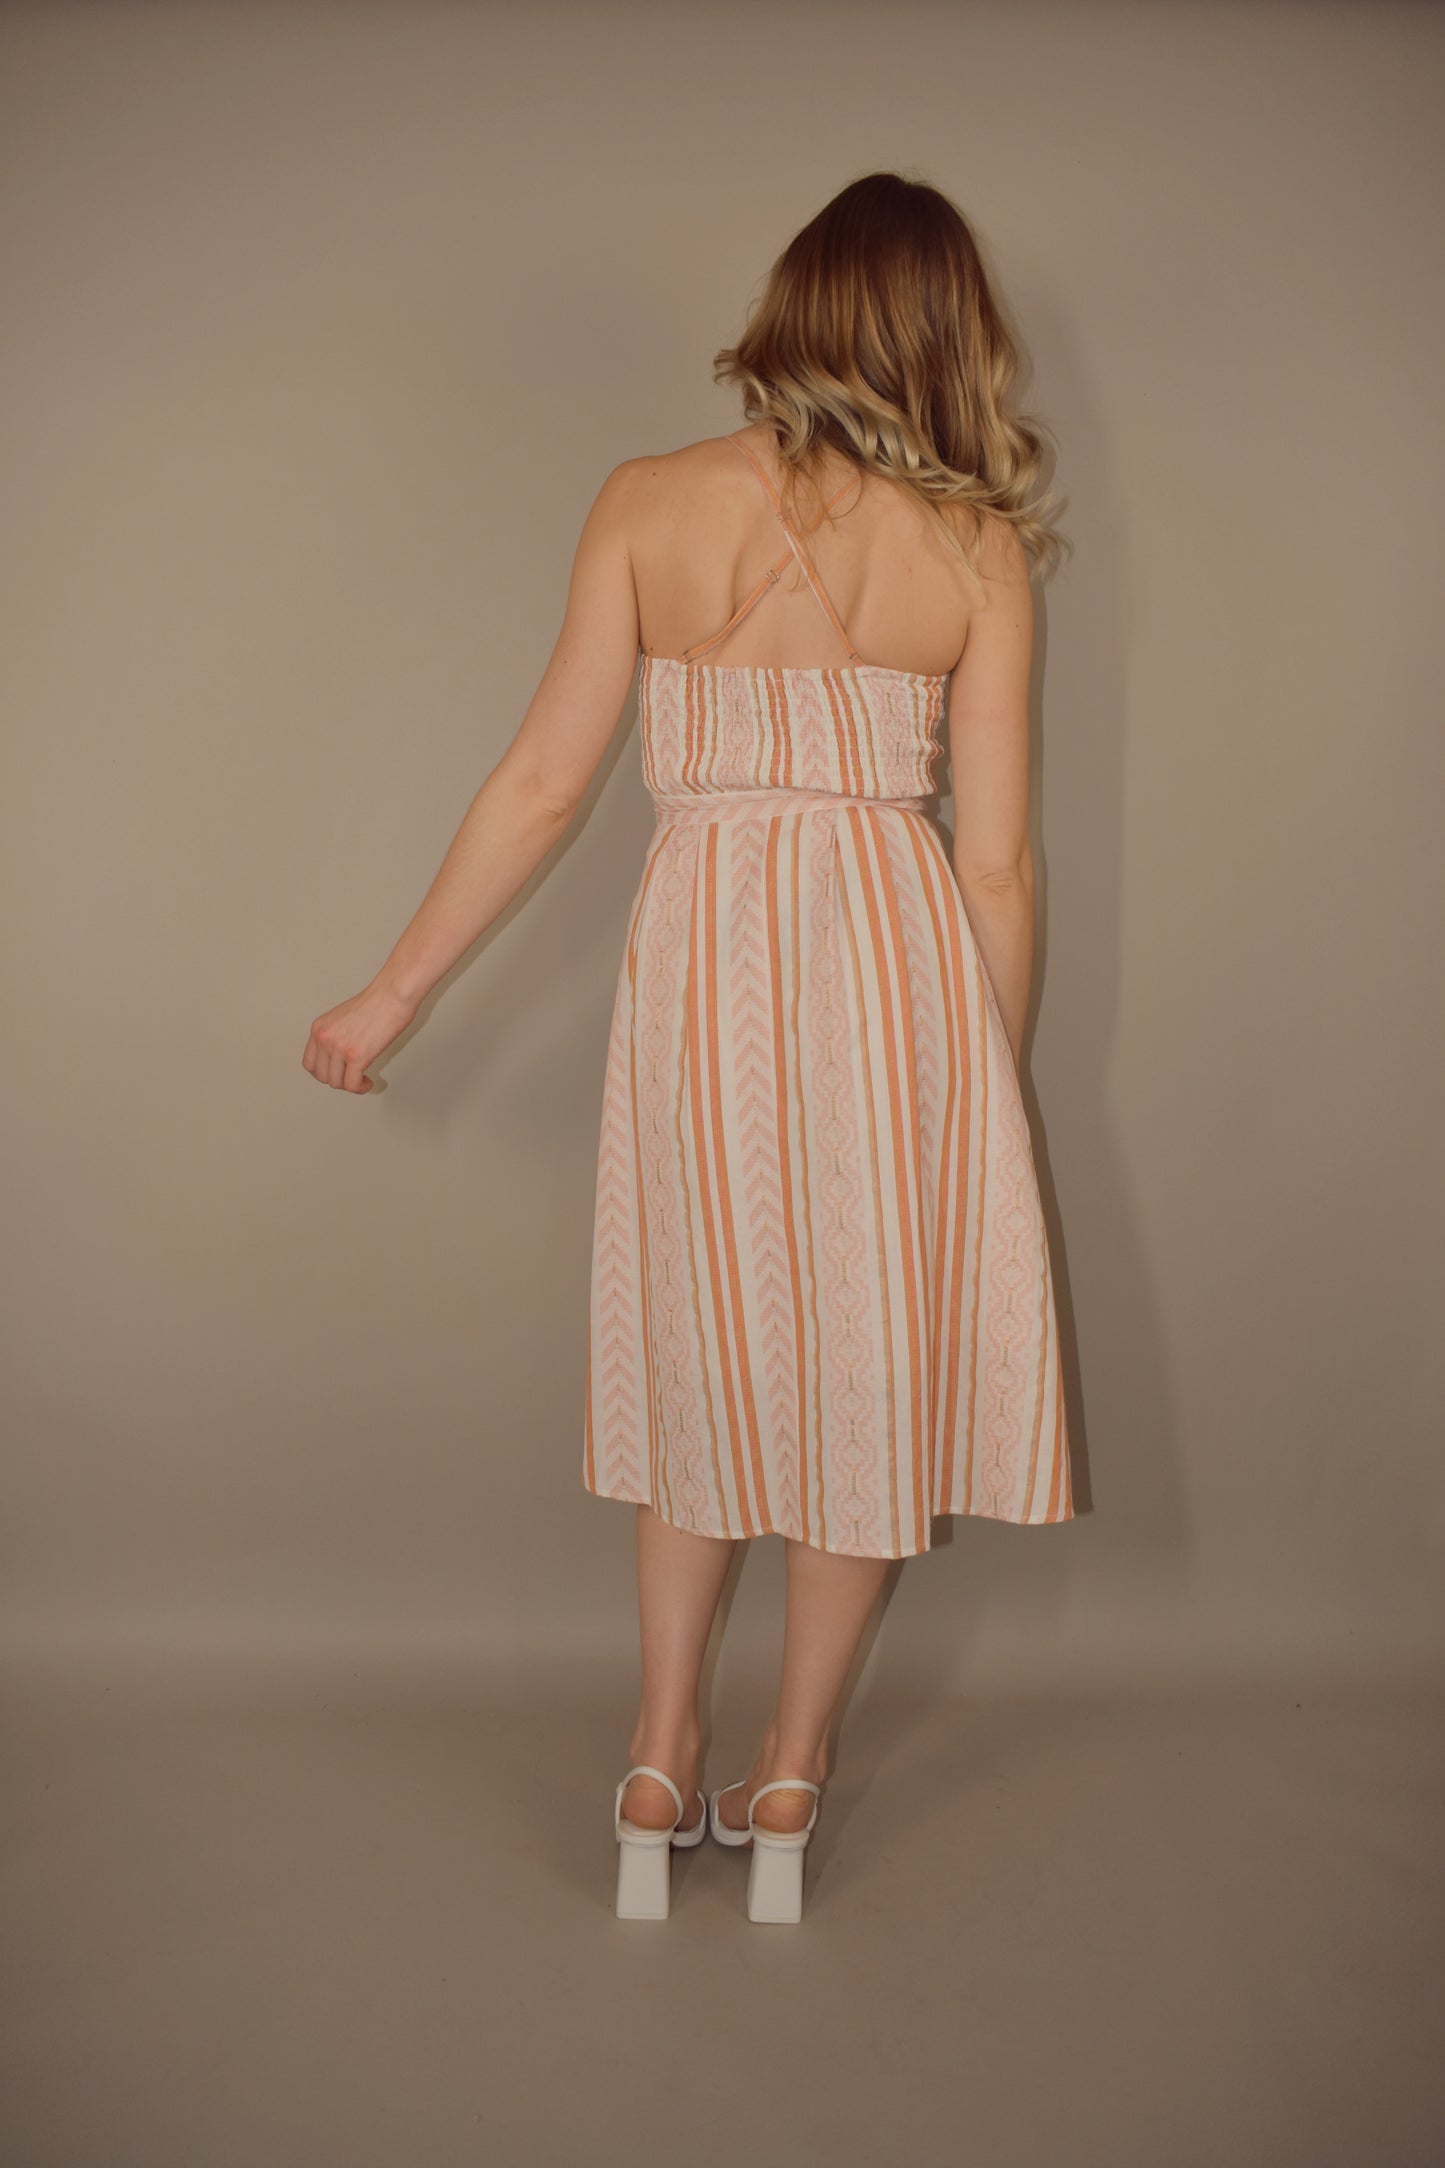 Stripe and chevron patterned midi dress with fitted bodice and zip enclosure. adjustable spaghetti straps. lined and a little bit of swing to it. slight v in front. smocked upper back. criss cross straps